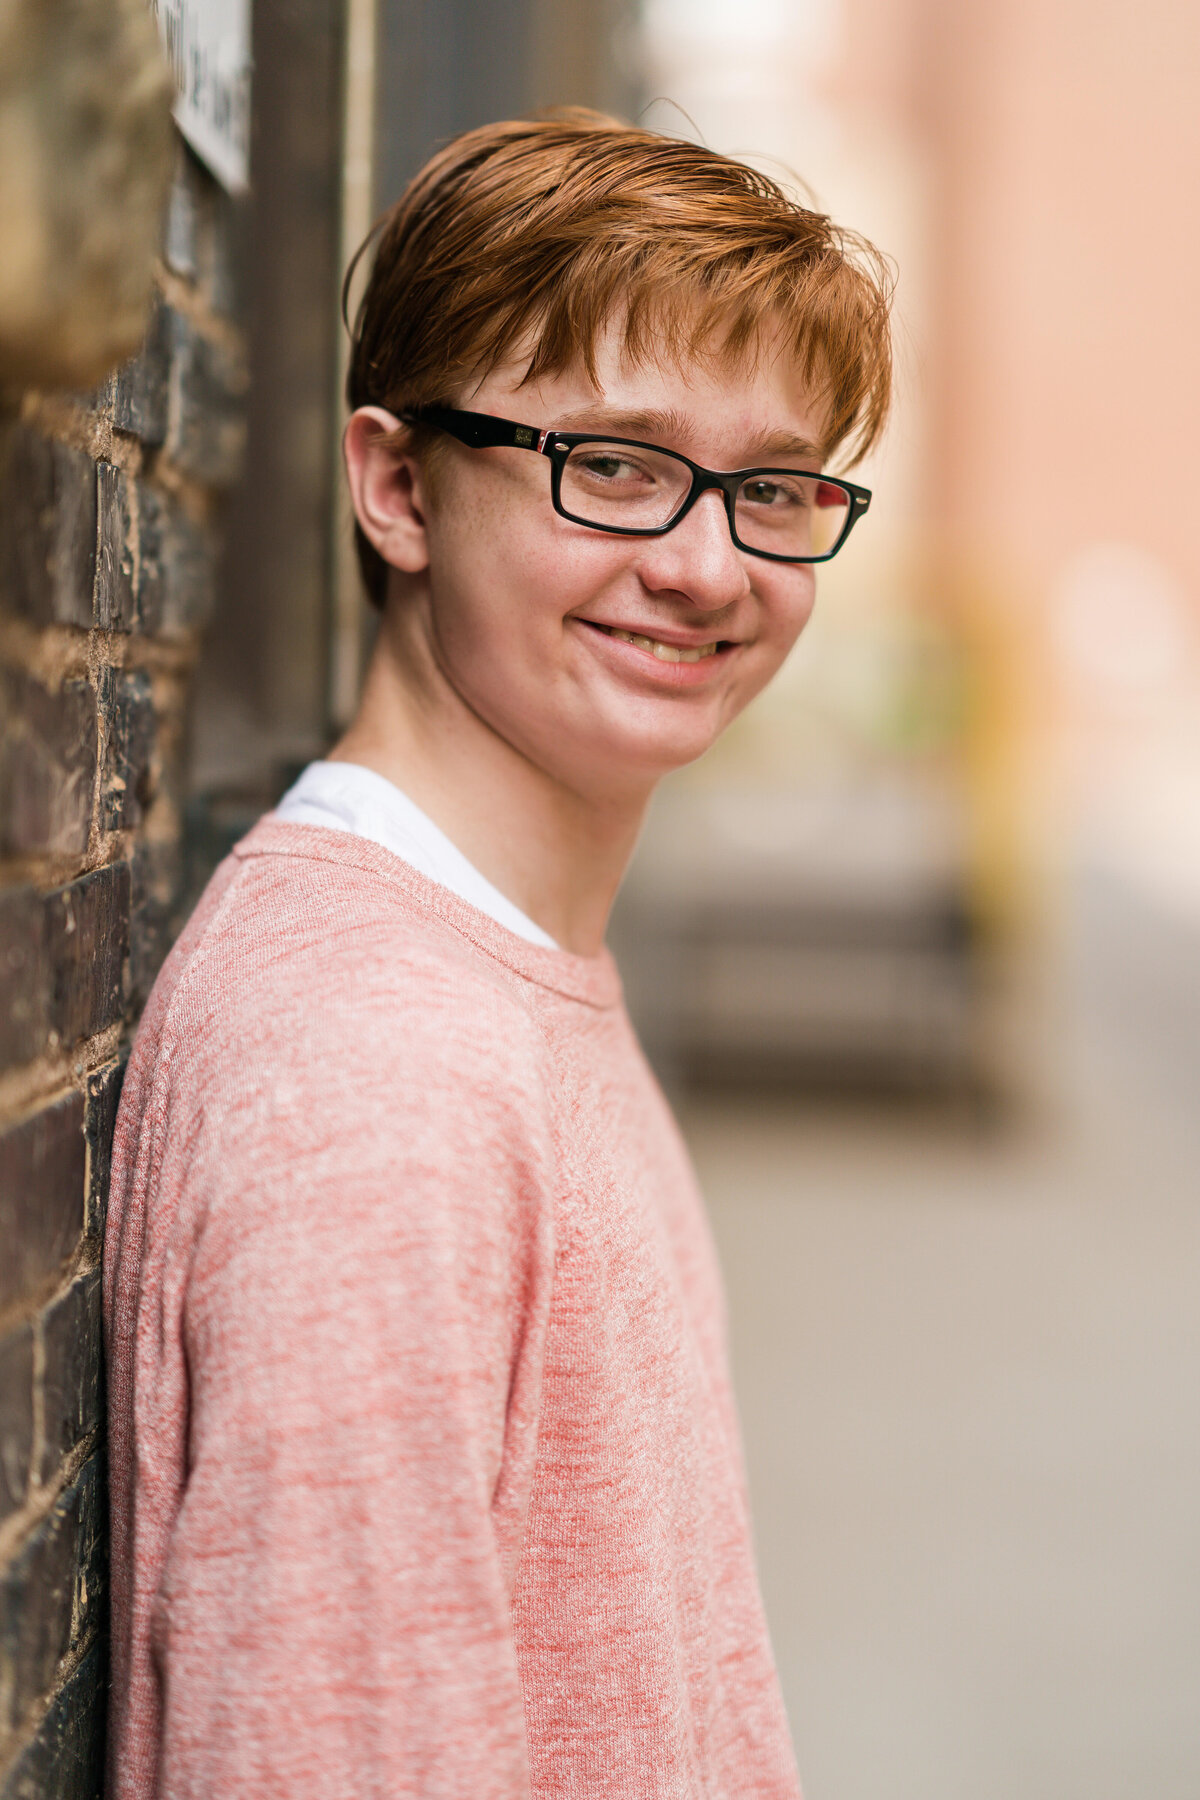 Senior boy with glasses dressed in pink shirt leans against a brick wall.